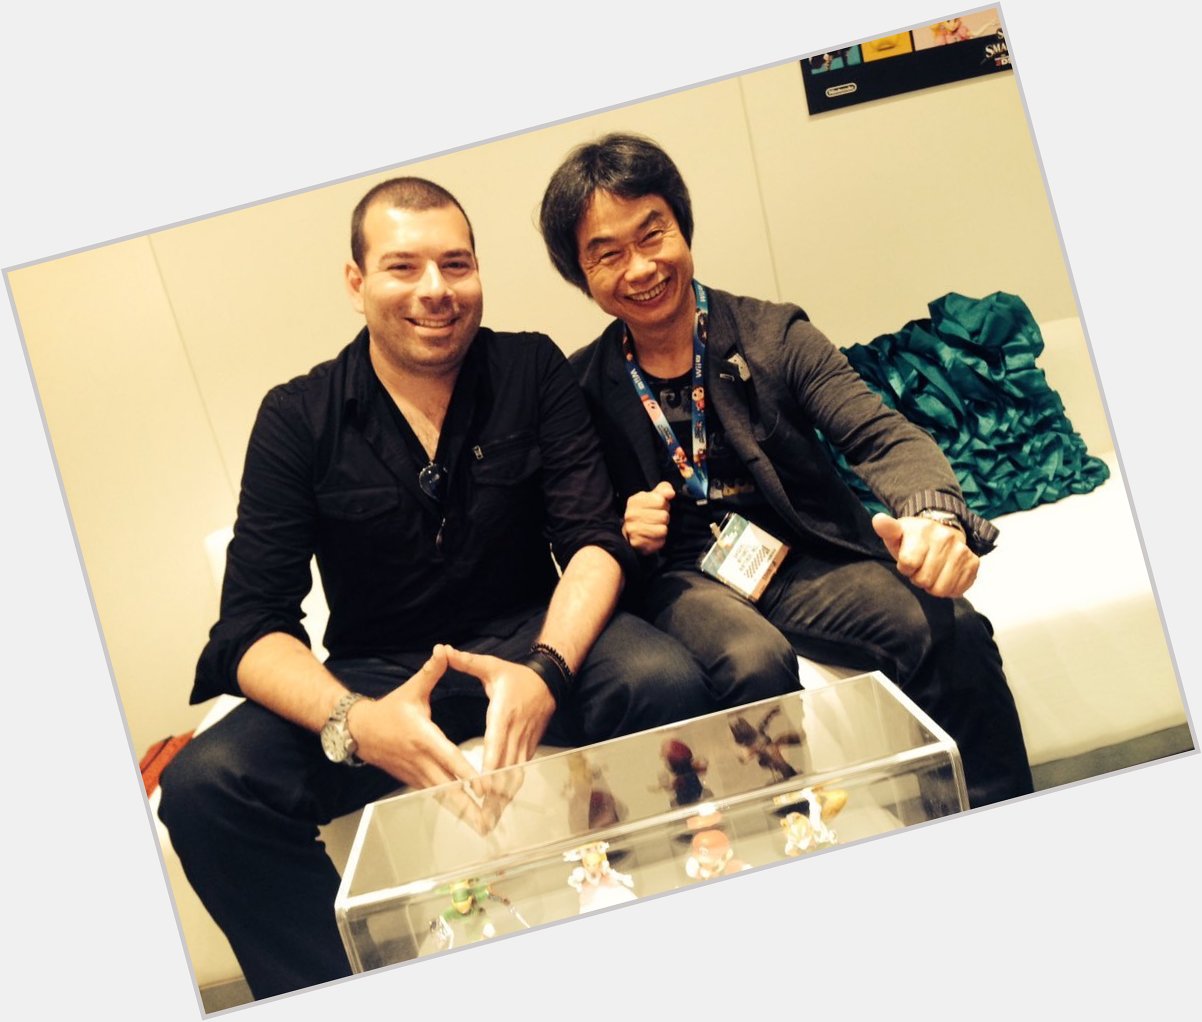 Agentbizzle: Happy 63rd birthday to Shigeru Miyamoto, the nicest guy I\ve ever met and 